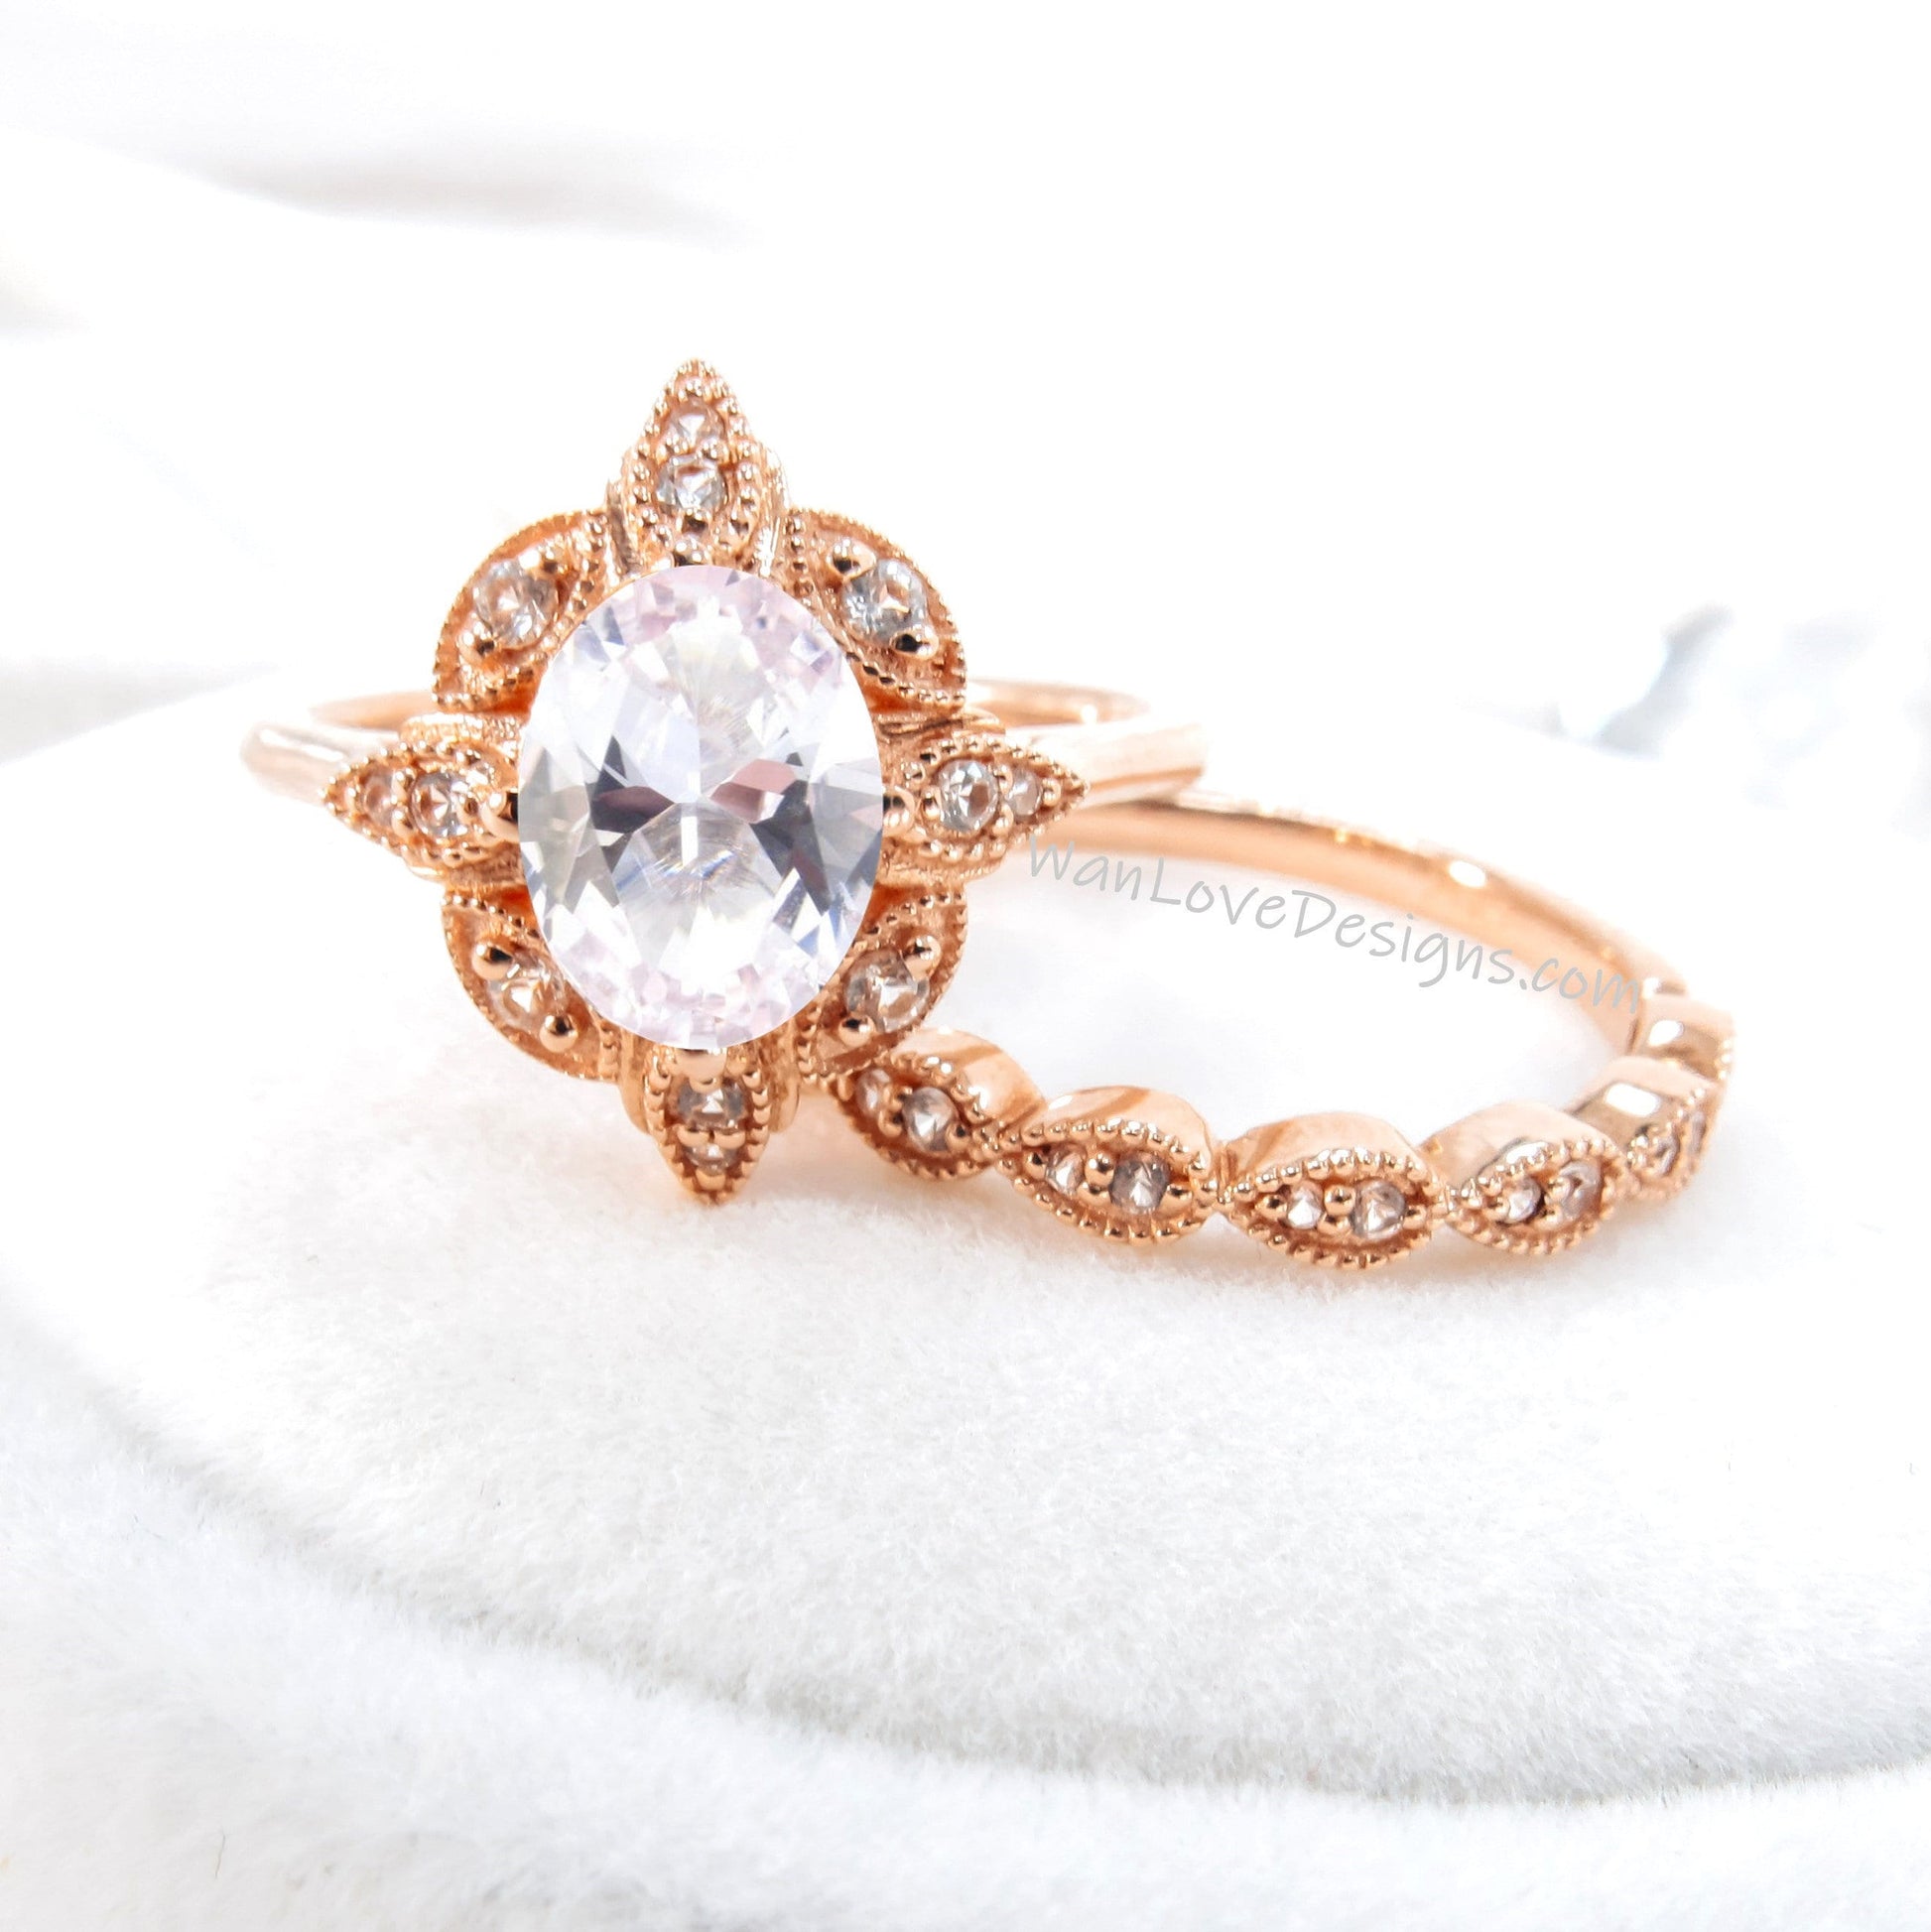 Oval Light Pink Sapphire engagement ring set Rose gold Halo vintage engagement ring Pear Half eternity Diamond ring Bridal Anniversary gift Wan Love Designs